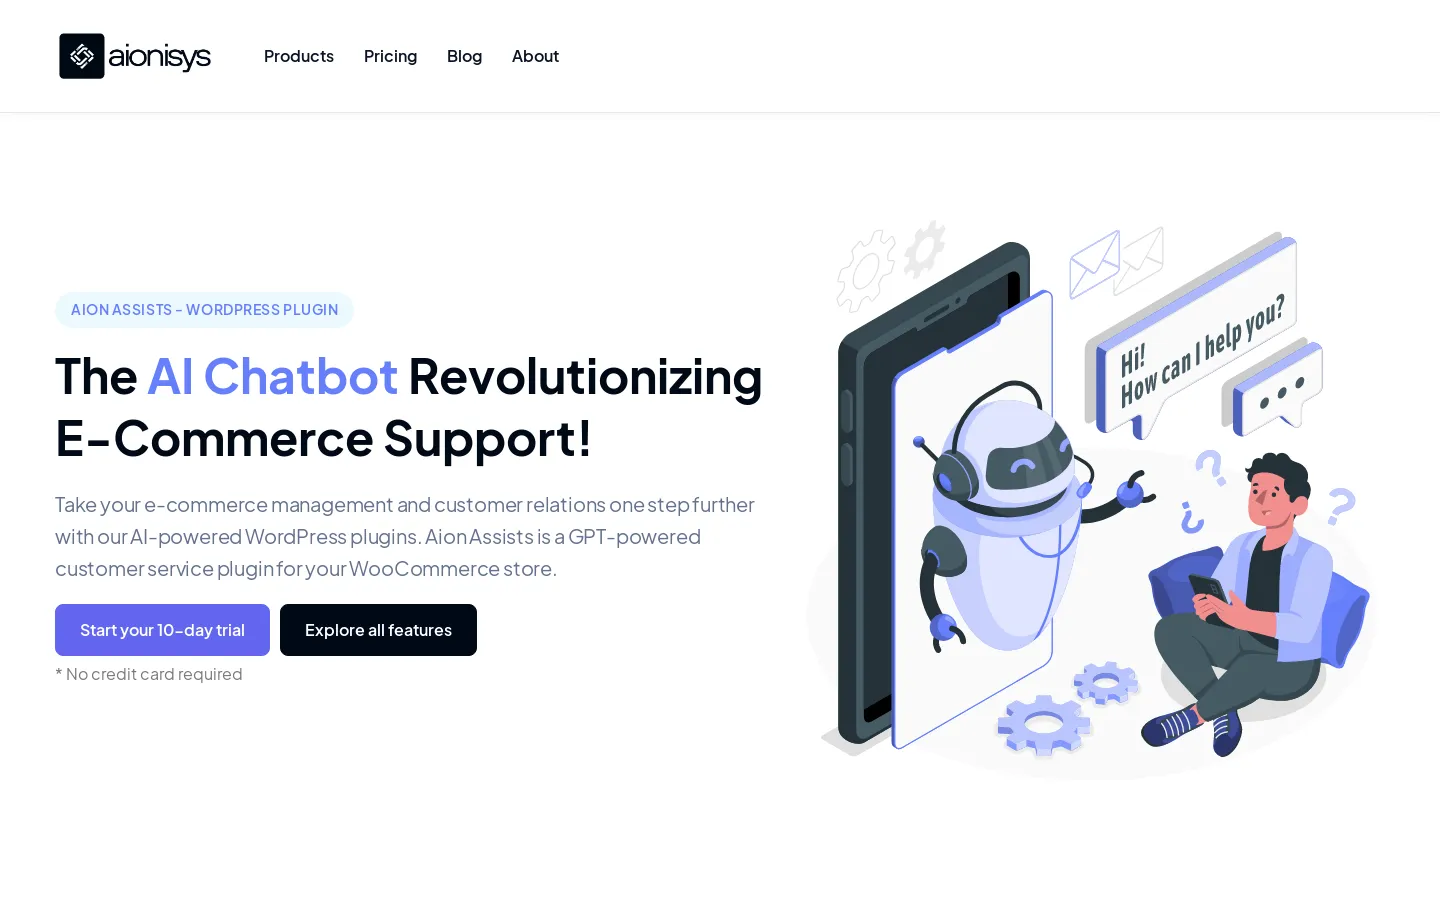 GPT-powered customer service for WooCommerce | Aionisys